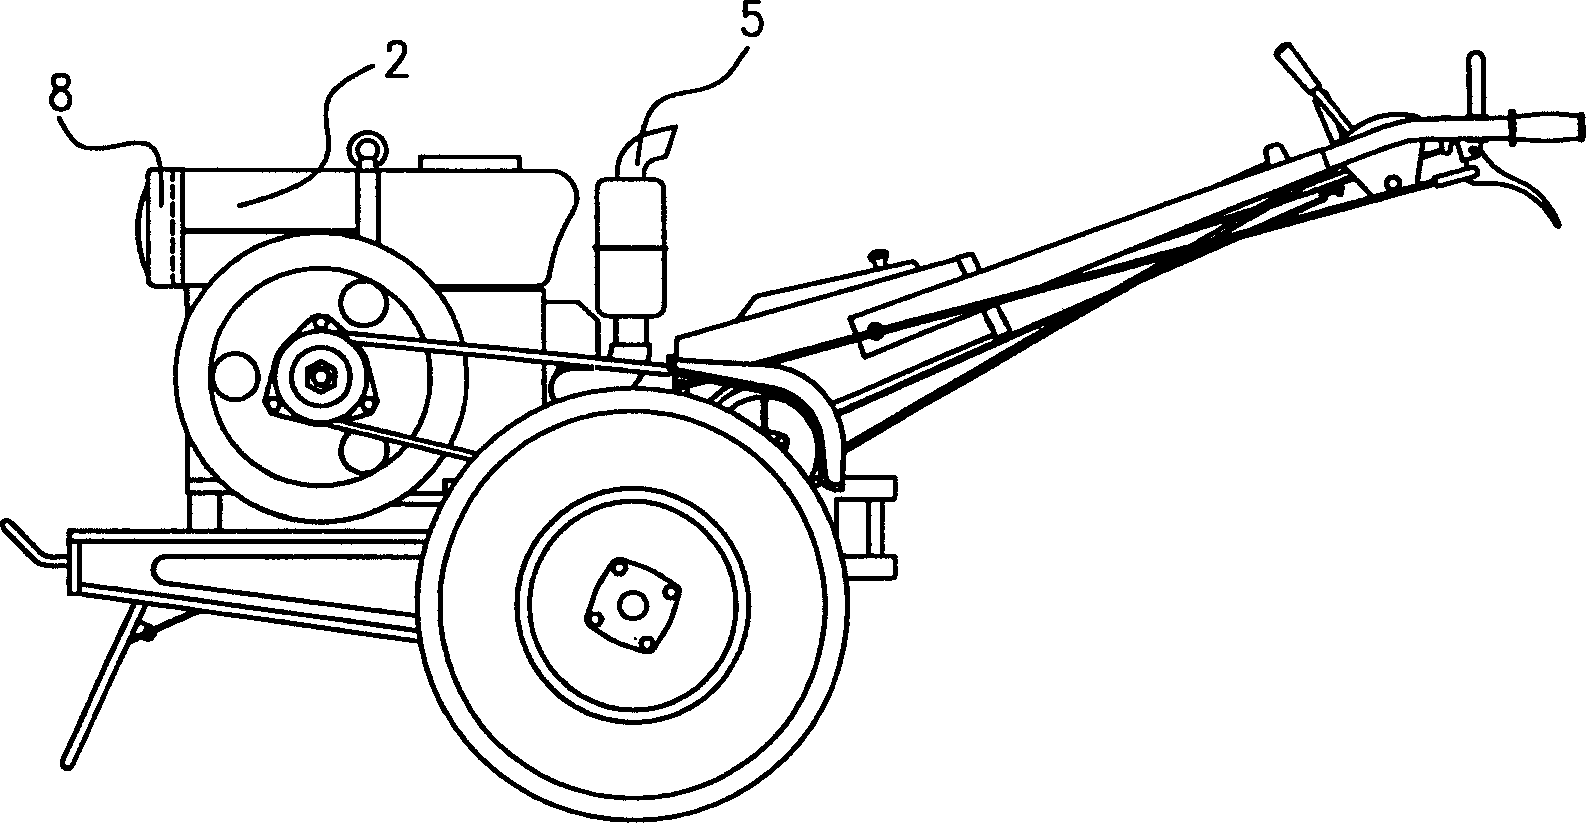 Single cylinder horizontal water cooling diesel engine hand tractor installed with said diesel engine